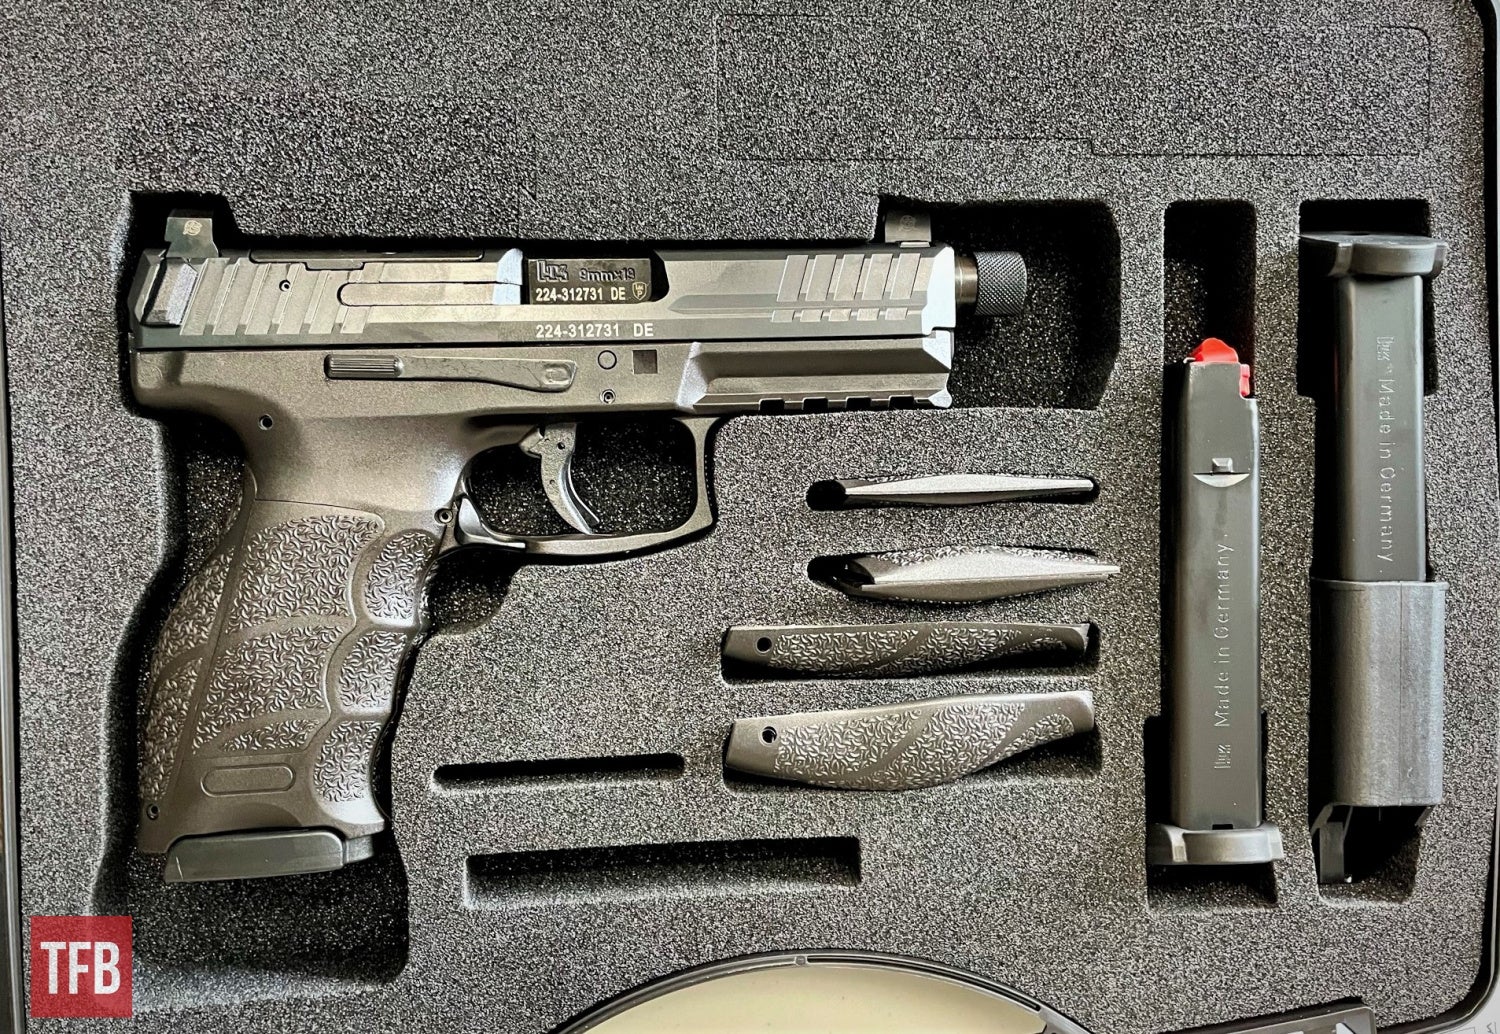 The VP9 Tactical comes as shown here, with the factory optics-cut slide, threaded barrel, and now 17-round mags instead of 15, as they used to include.